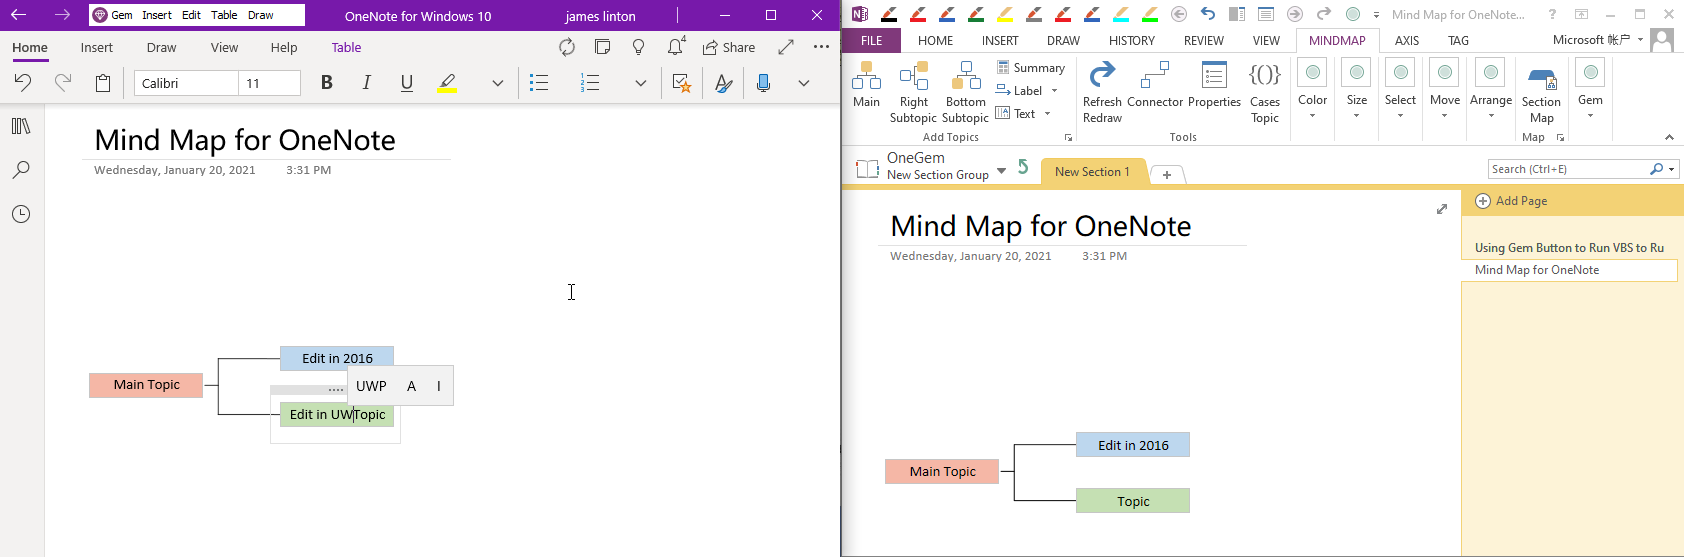 The mind map can be created in OneNote 2016 and then modified in OneNote for Win10.